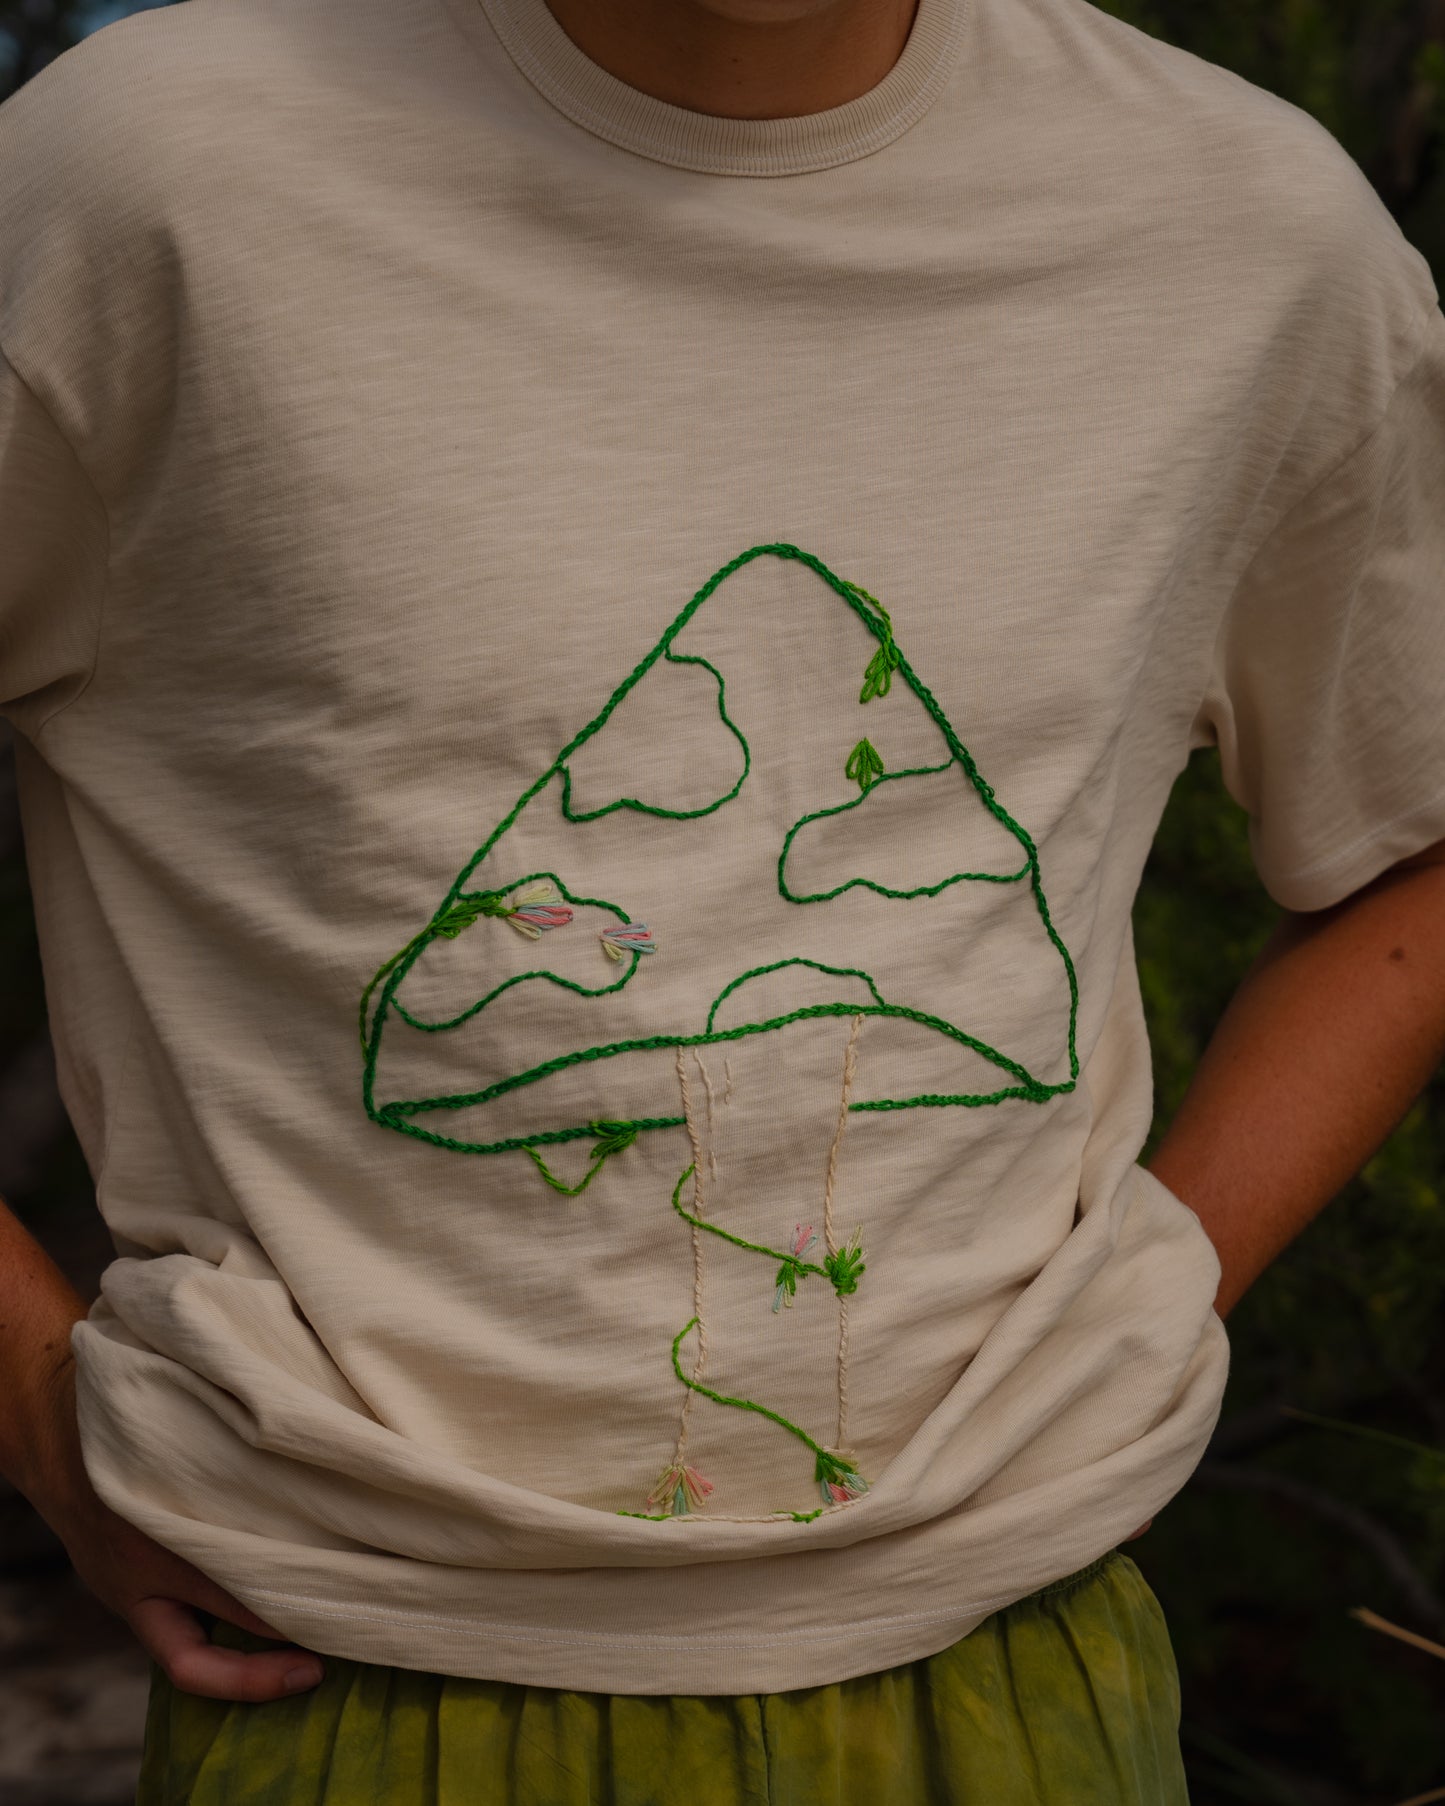 Journey Tee - Green Floral Fungi